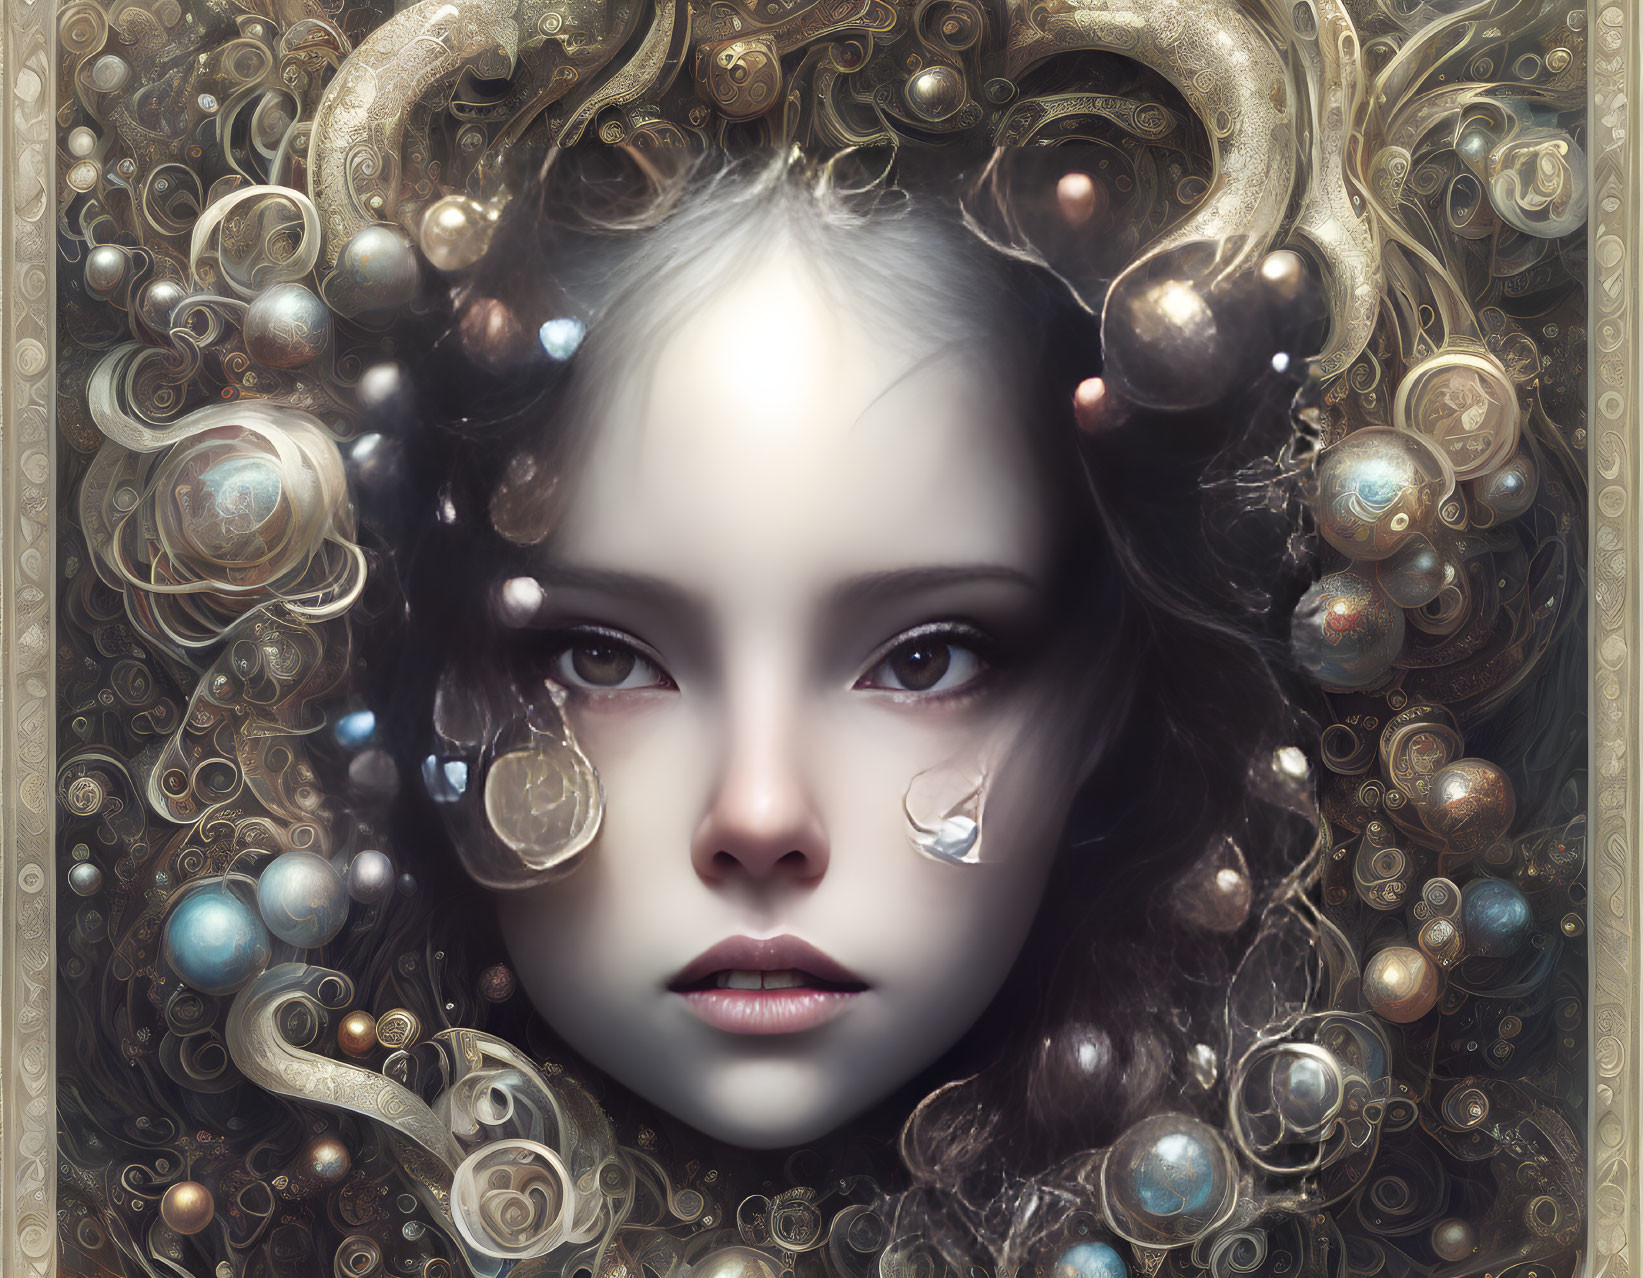 Surreal portrait featuring girl with mystical ornaments and floating orbs.